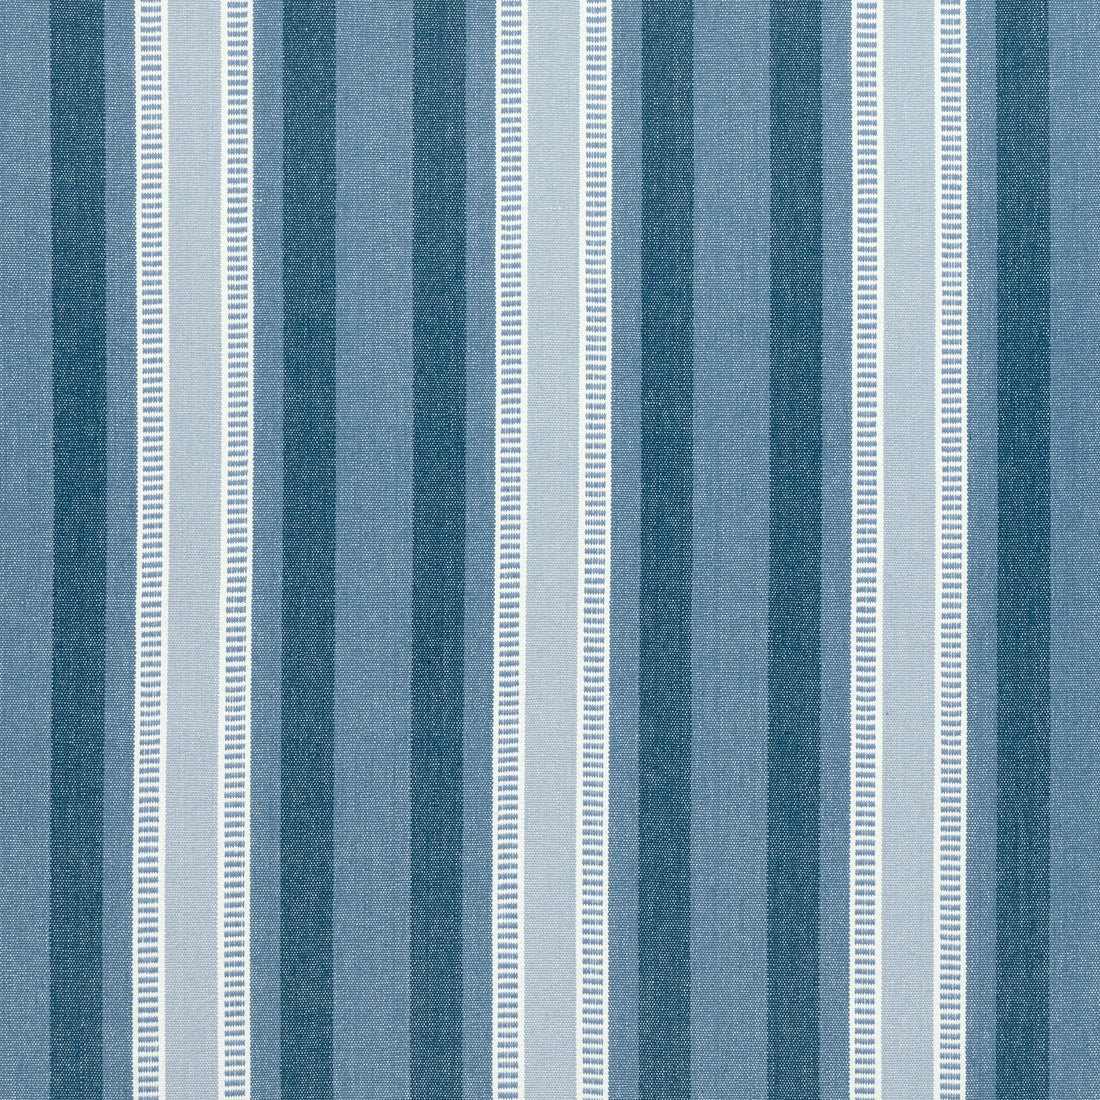 Dearden Stripe fabric in navy color - pattern number AW23156 - by Anna French in the Willow Tree collection